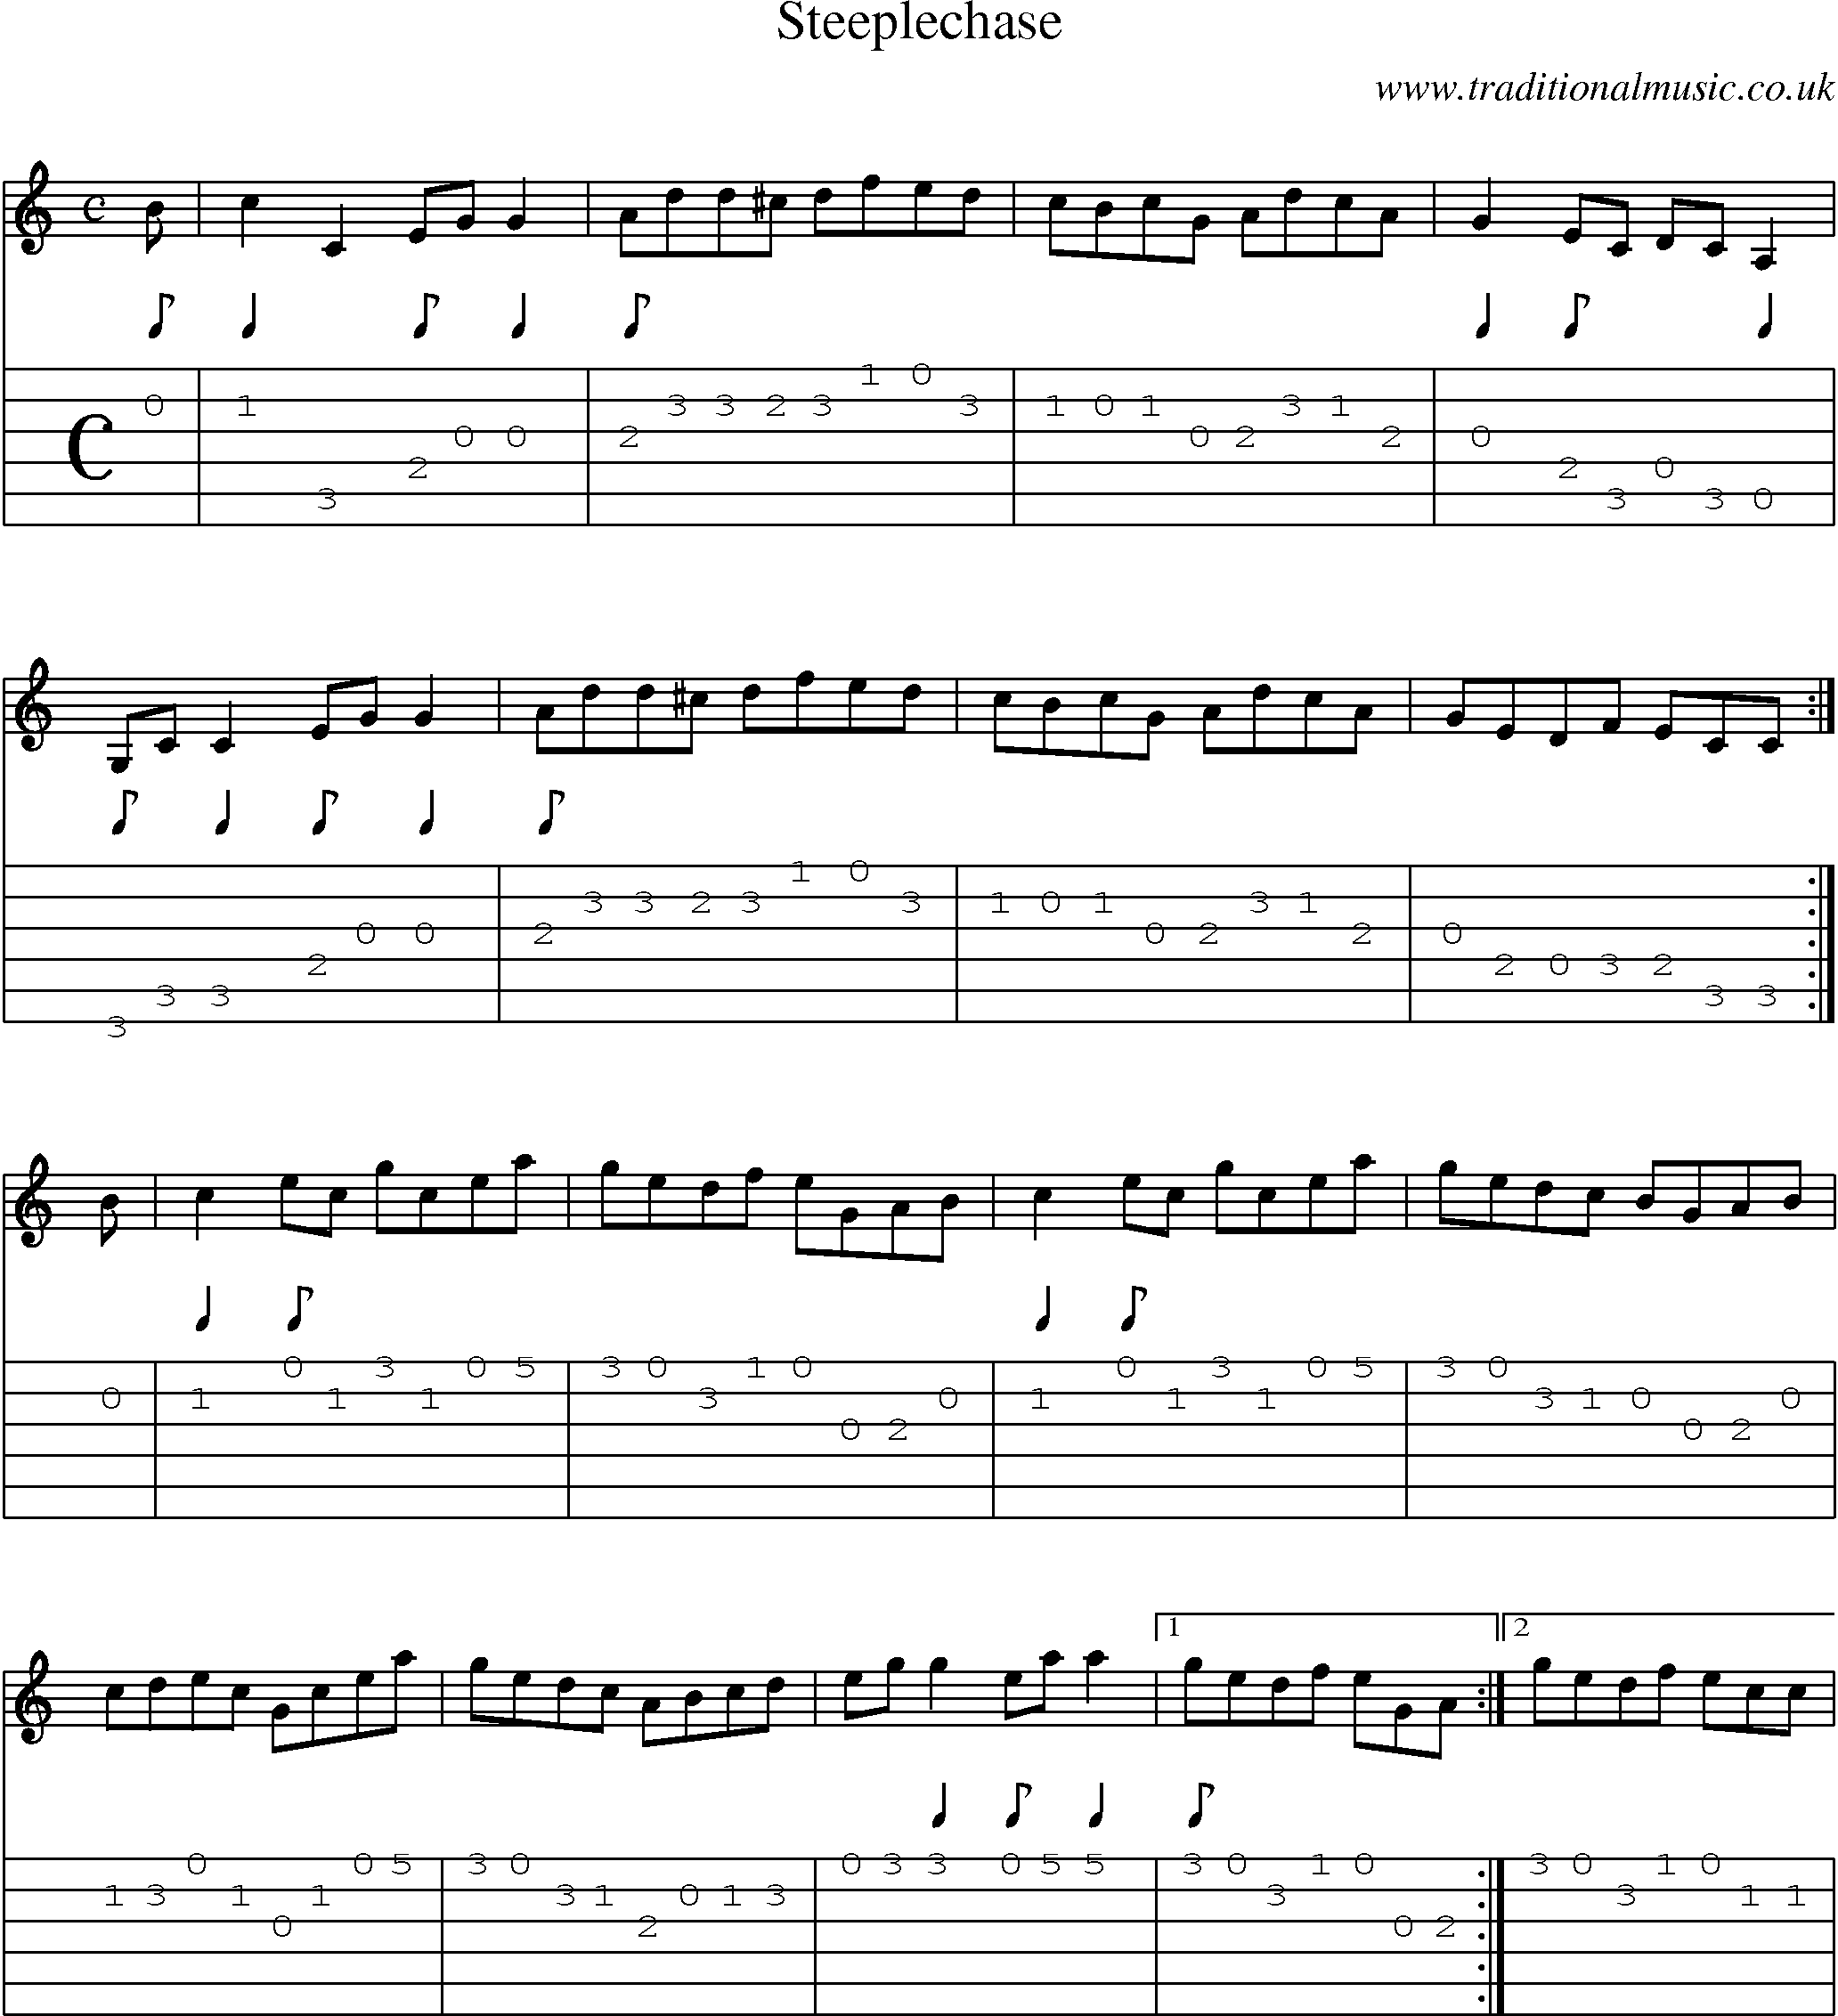 Music Score and Guitar Tabs for Steeplechase